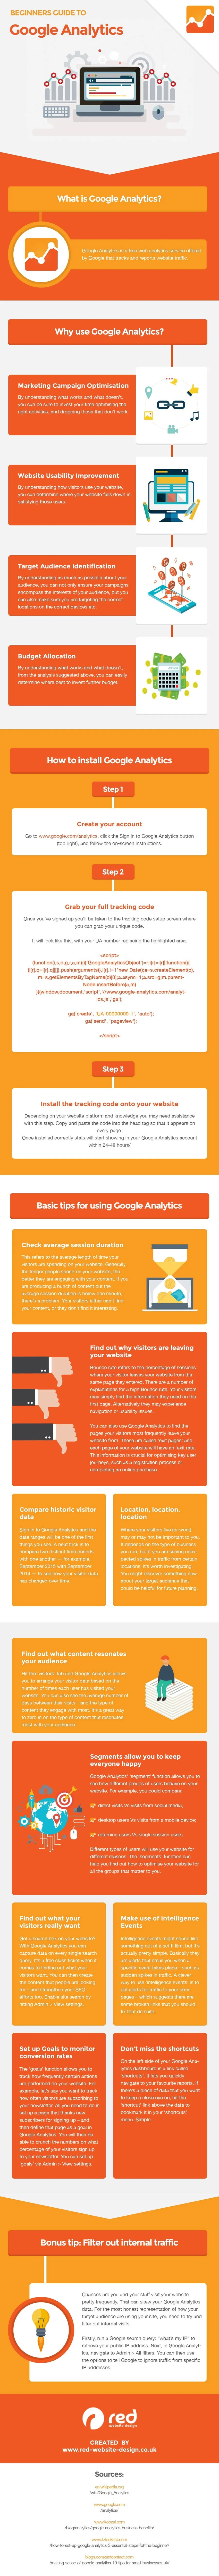 How to Use Google Analytics to Track Your Website Visitors - #Infographic